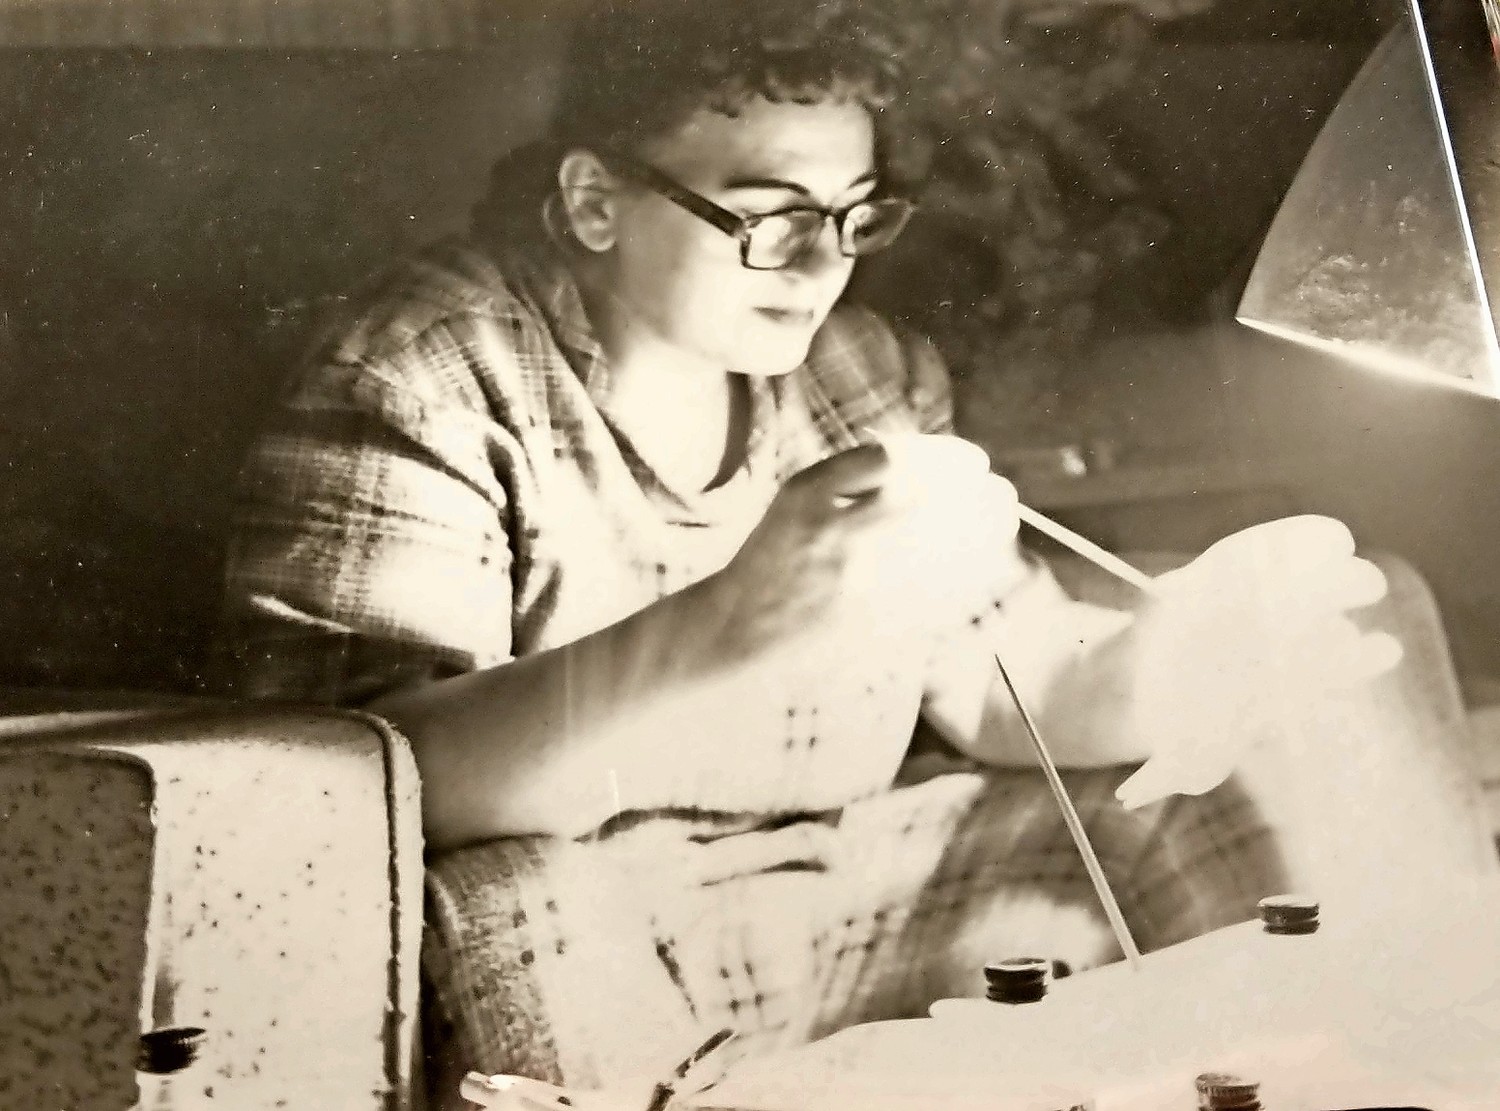 Charlie Franza snapped a photo of Nettie at her craft table in the 1960s.